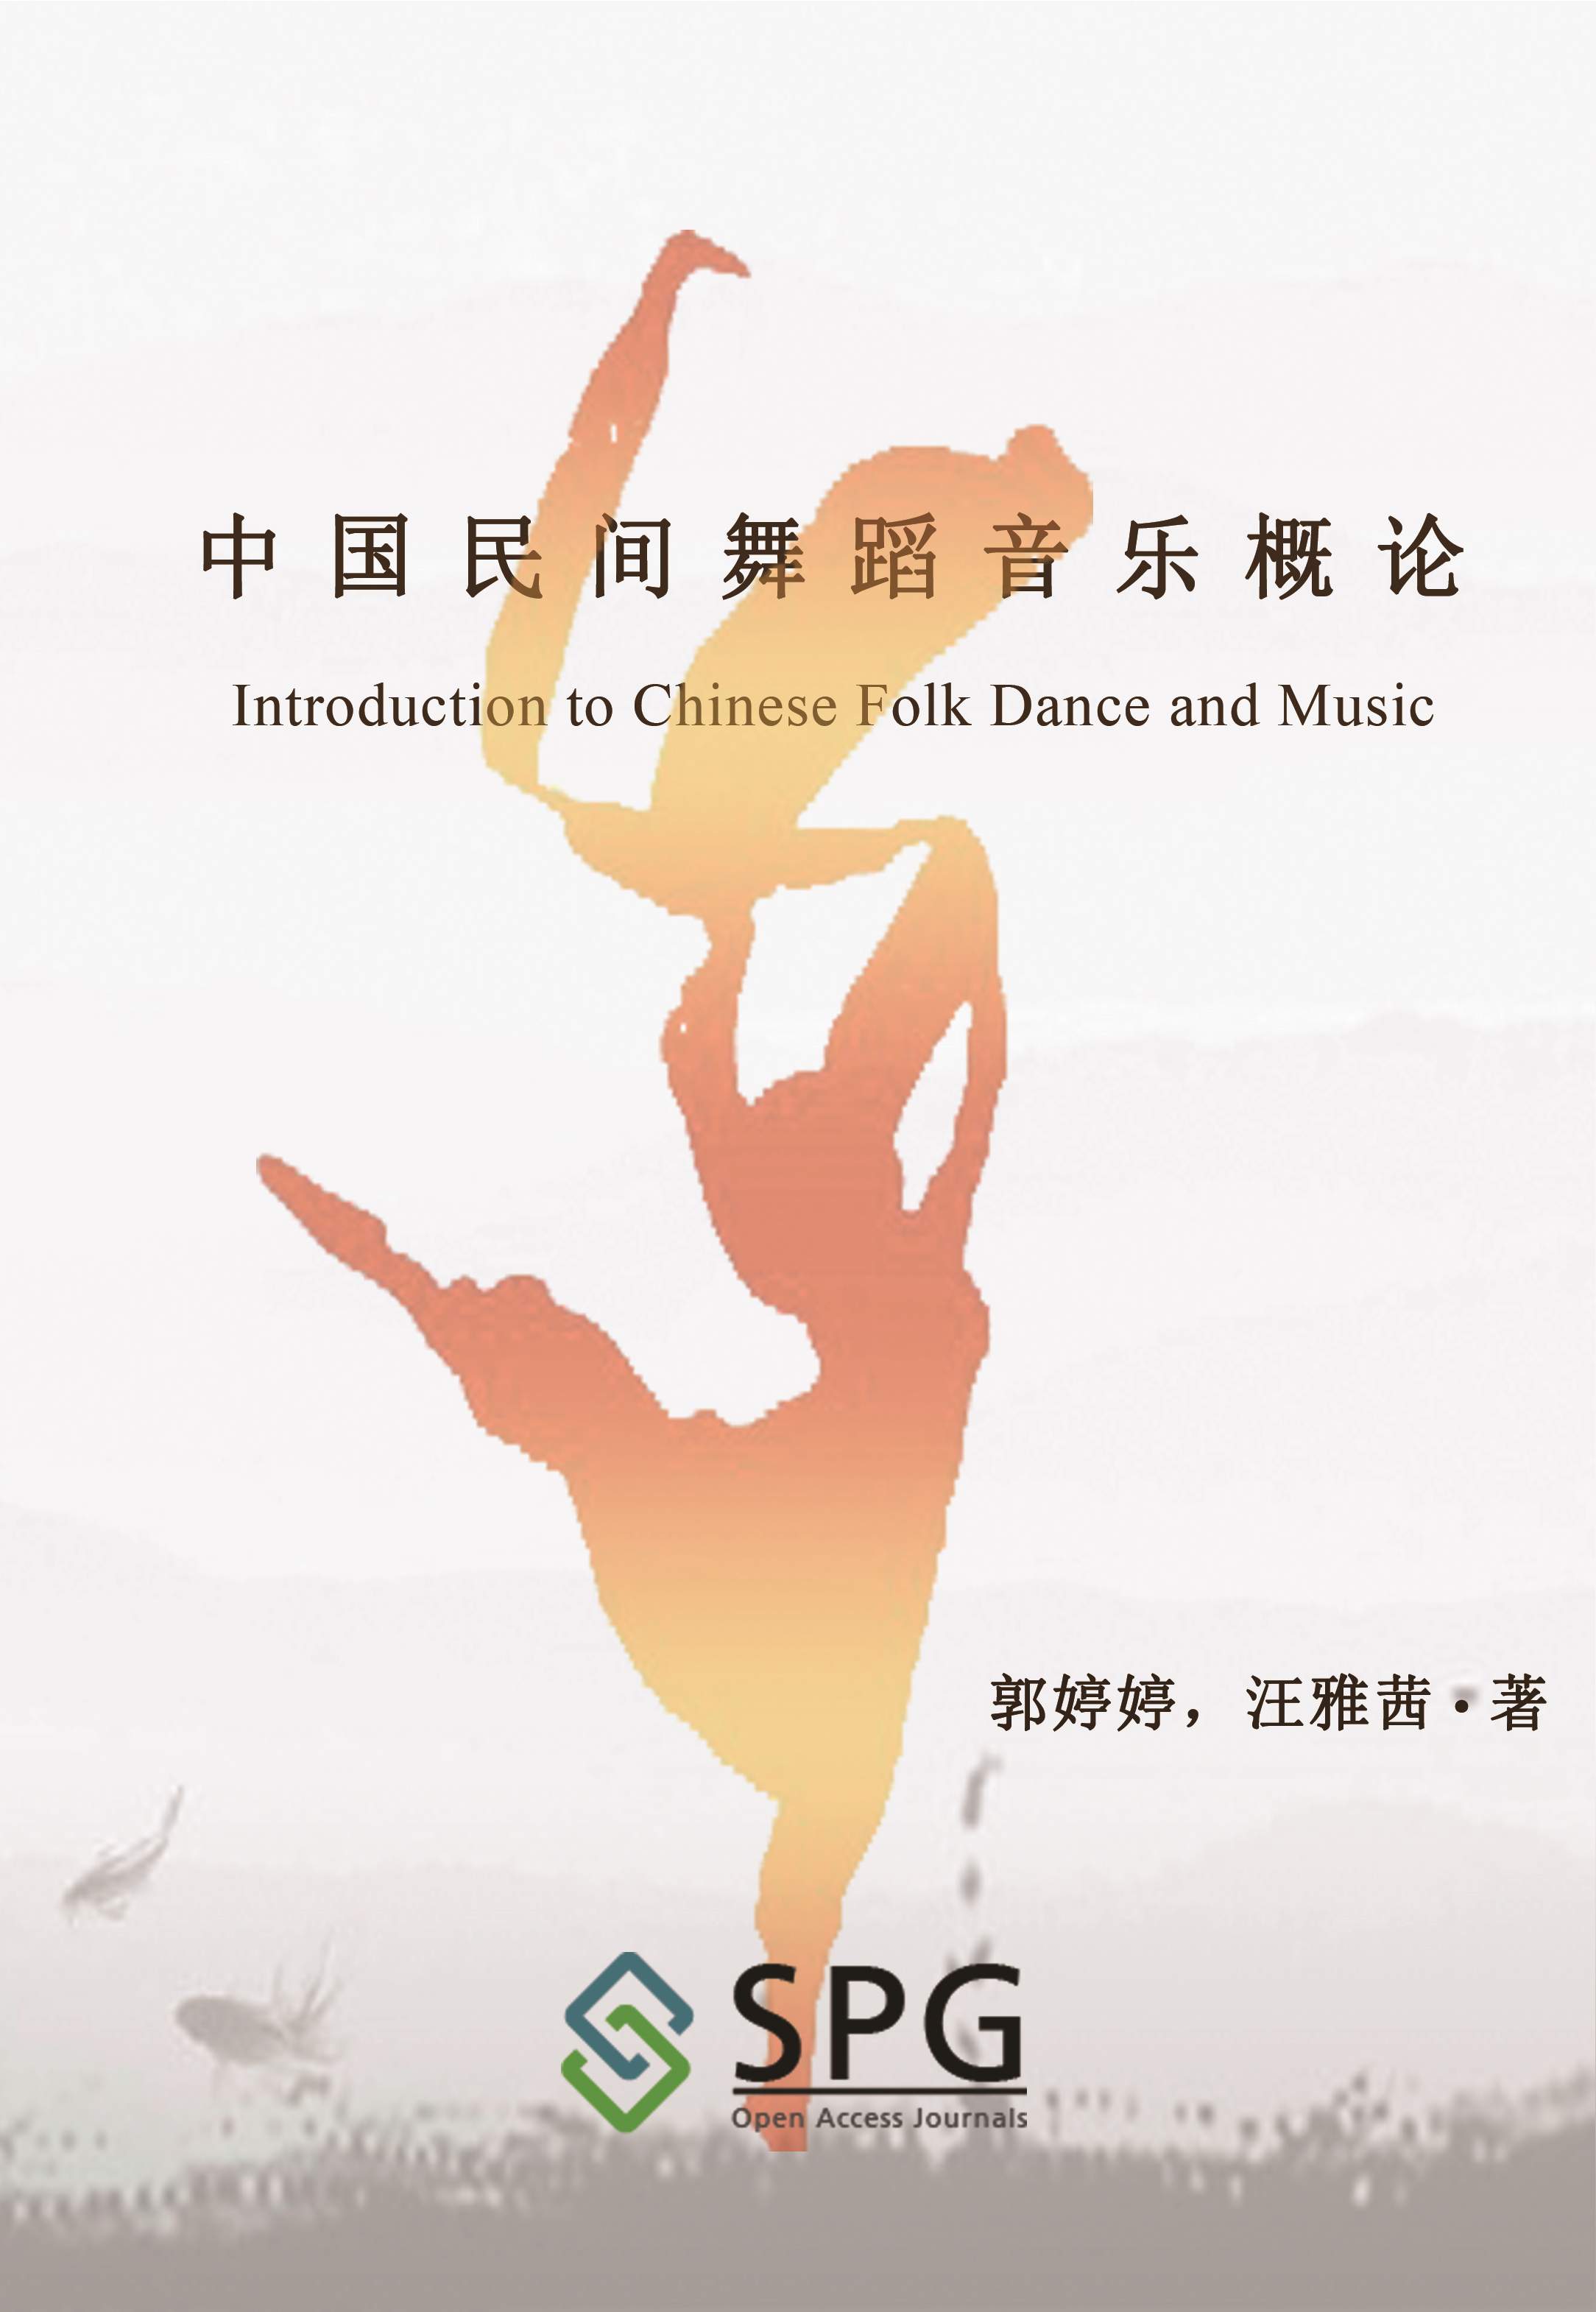 Introduction to Chinese Folk Dance and Music | Scholar Publishing Group